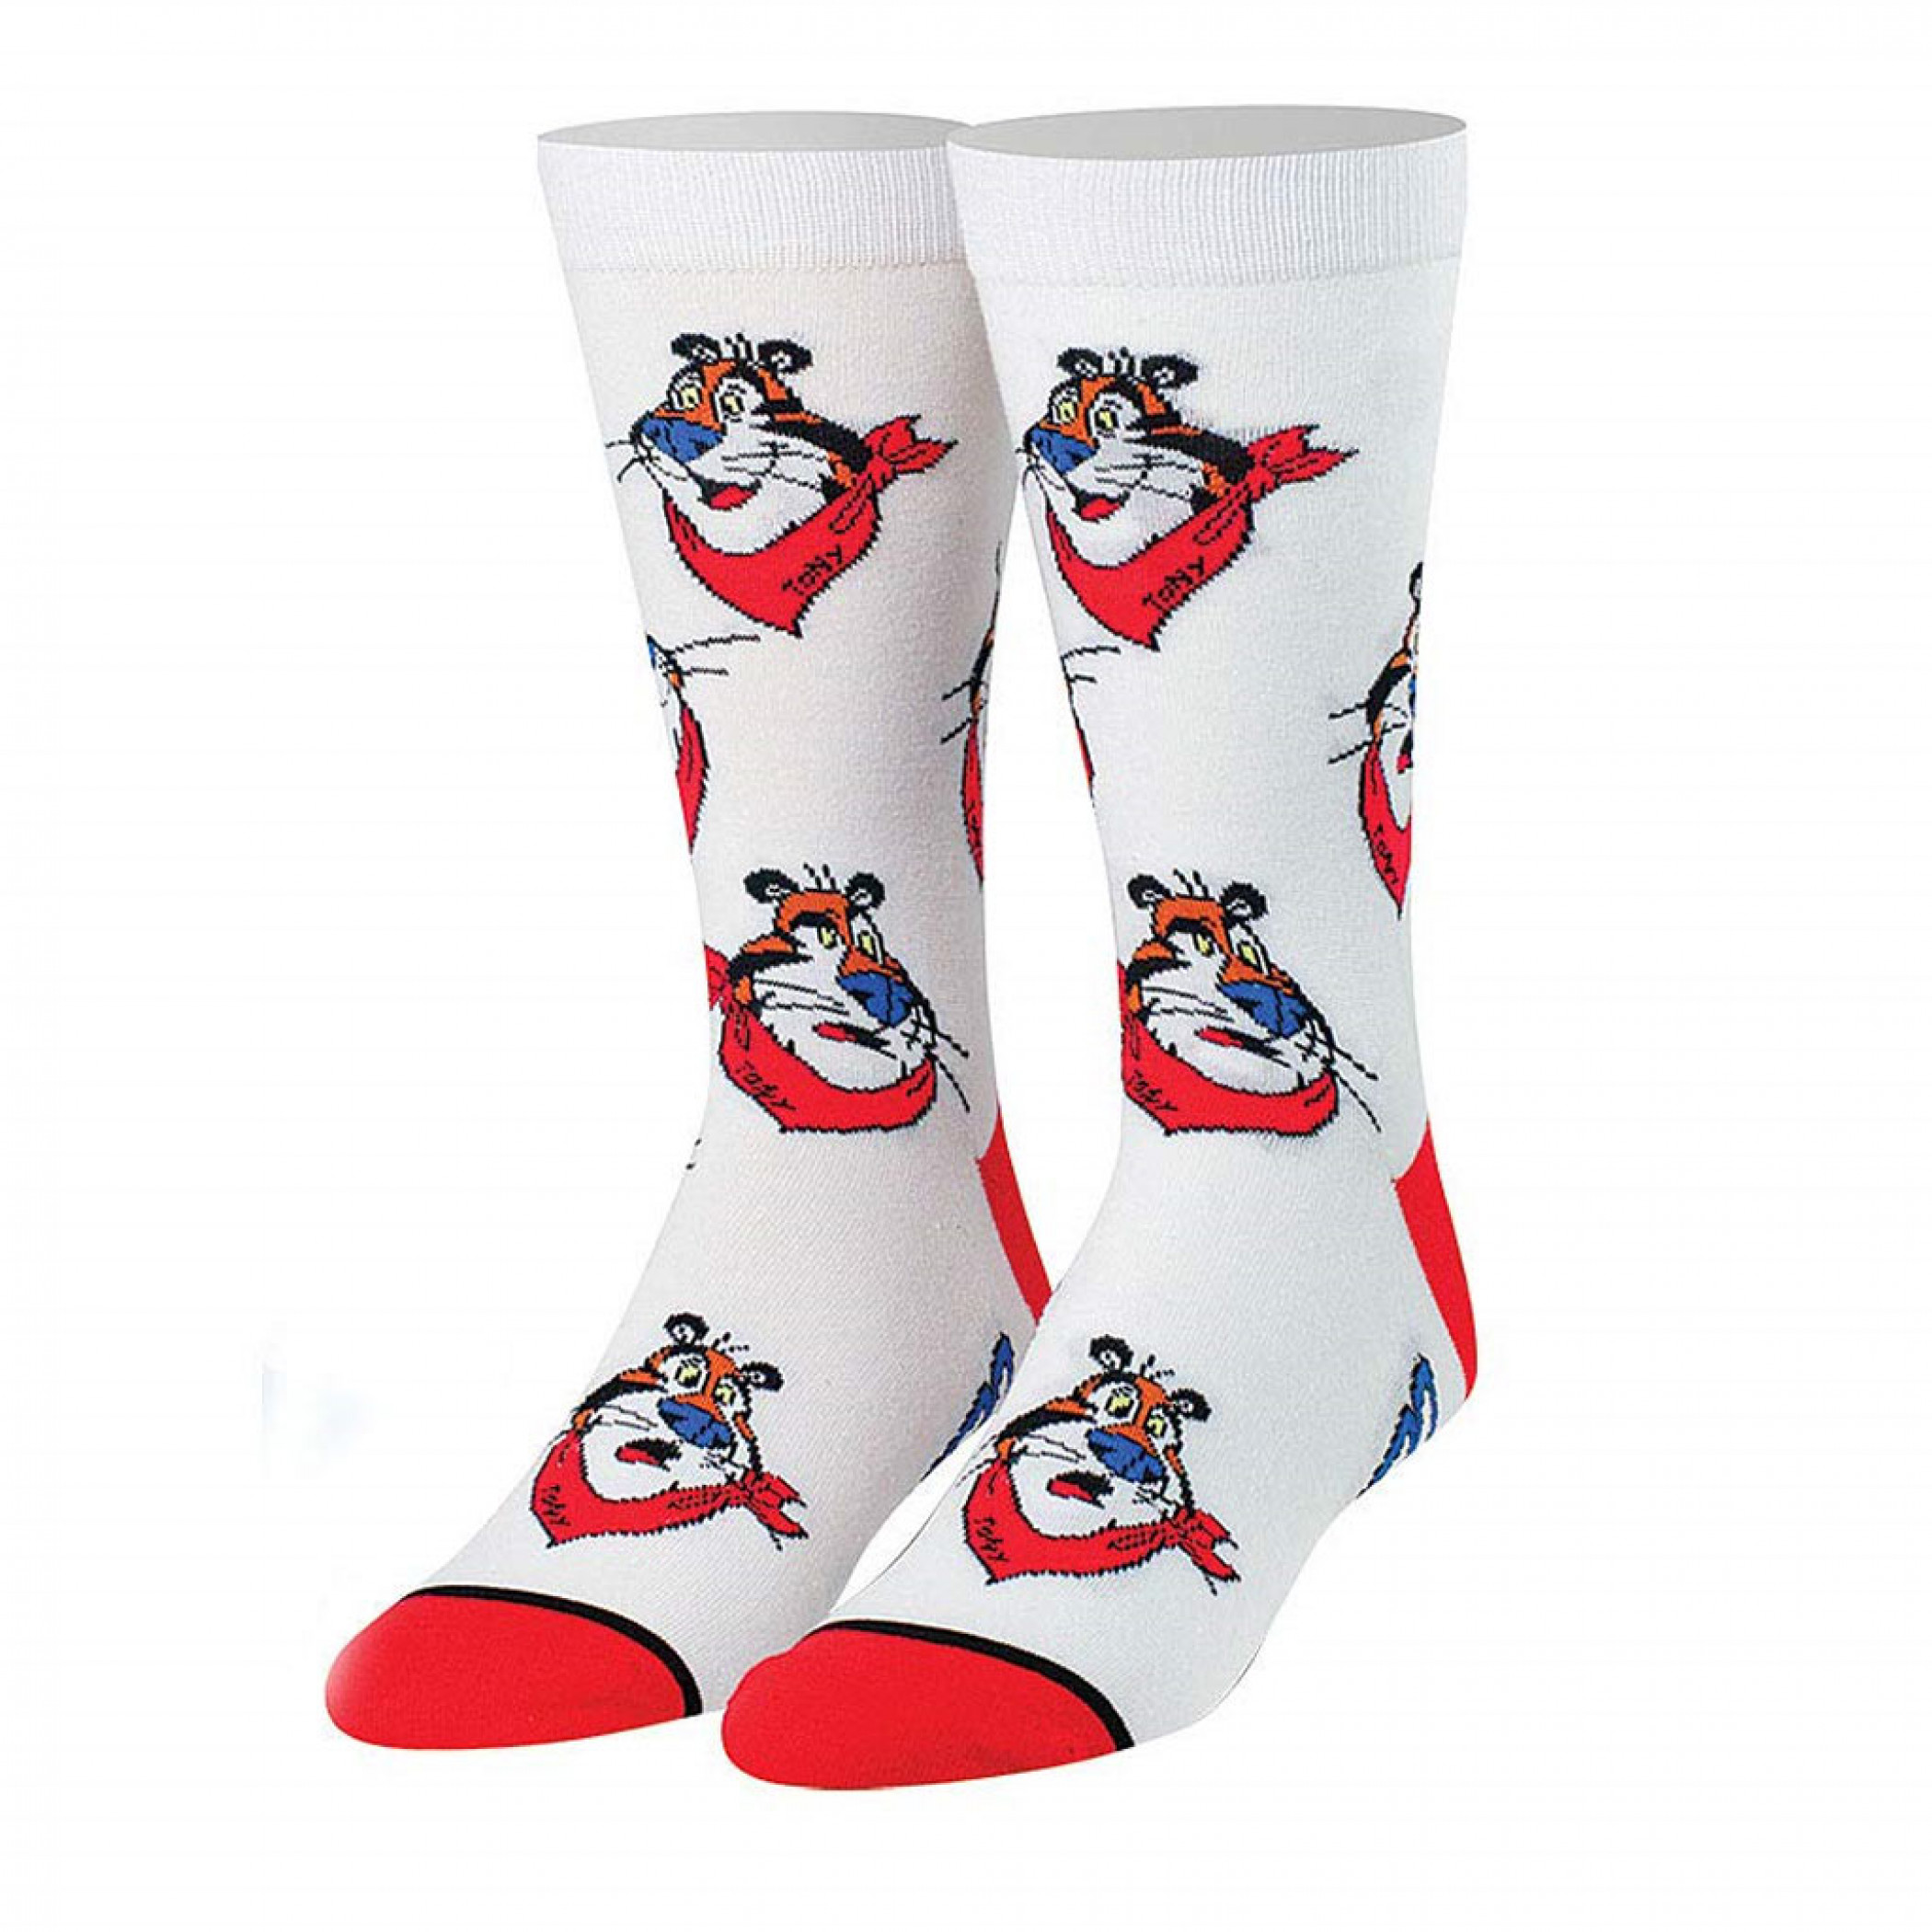 Frosted Flakes Tony The Tiger Cereal Socks